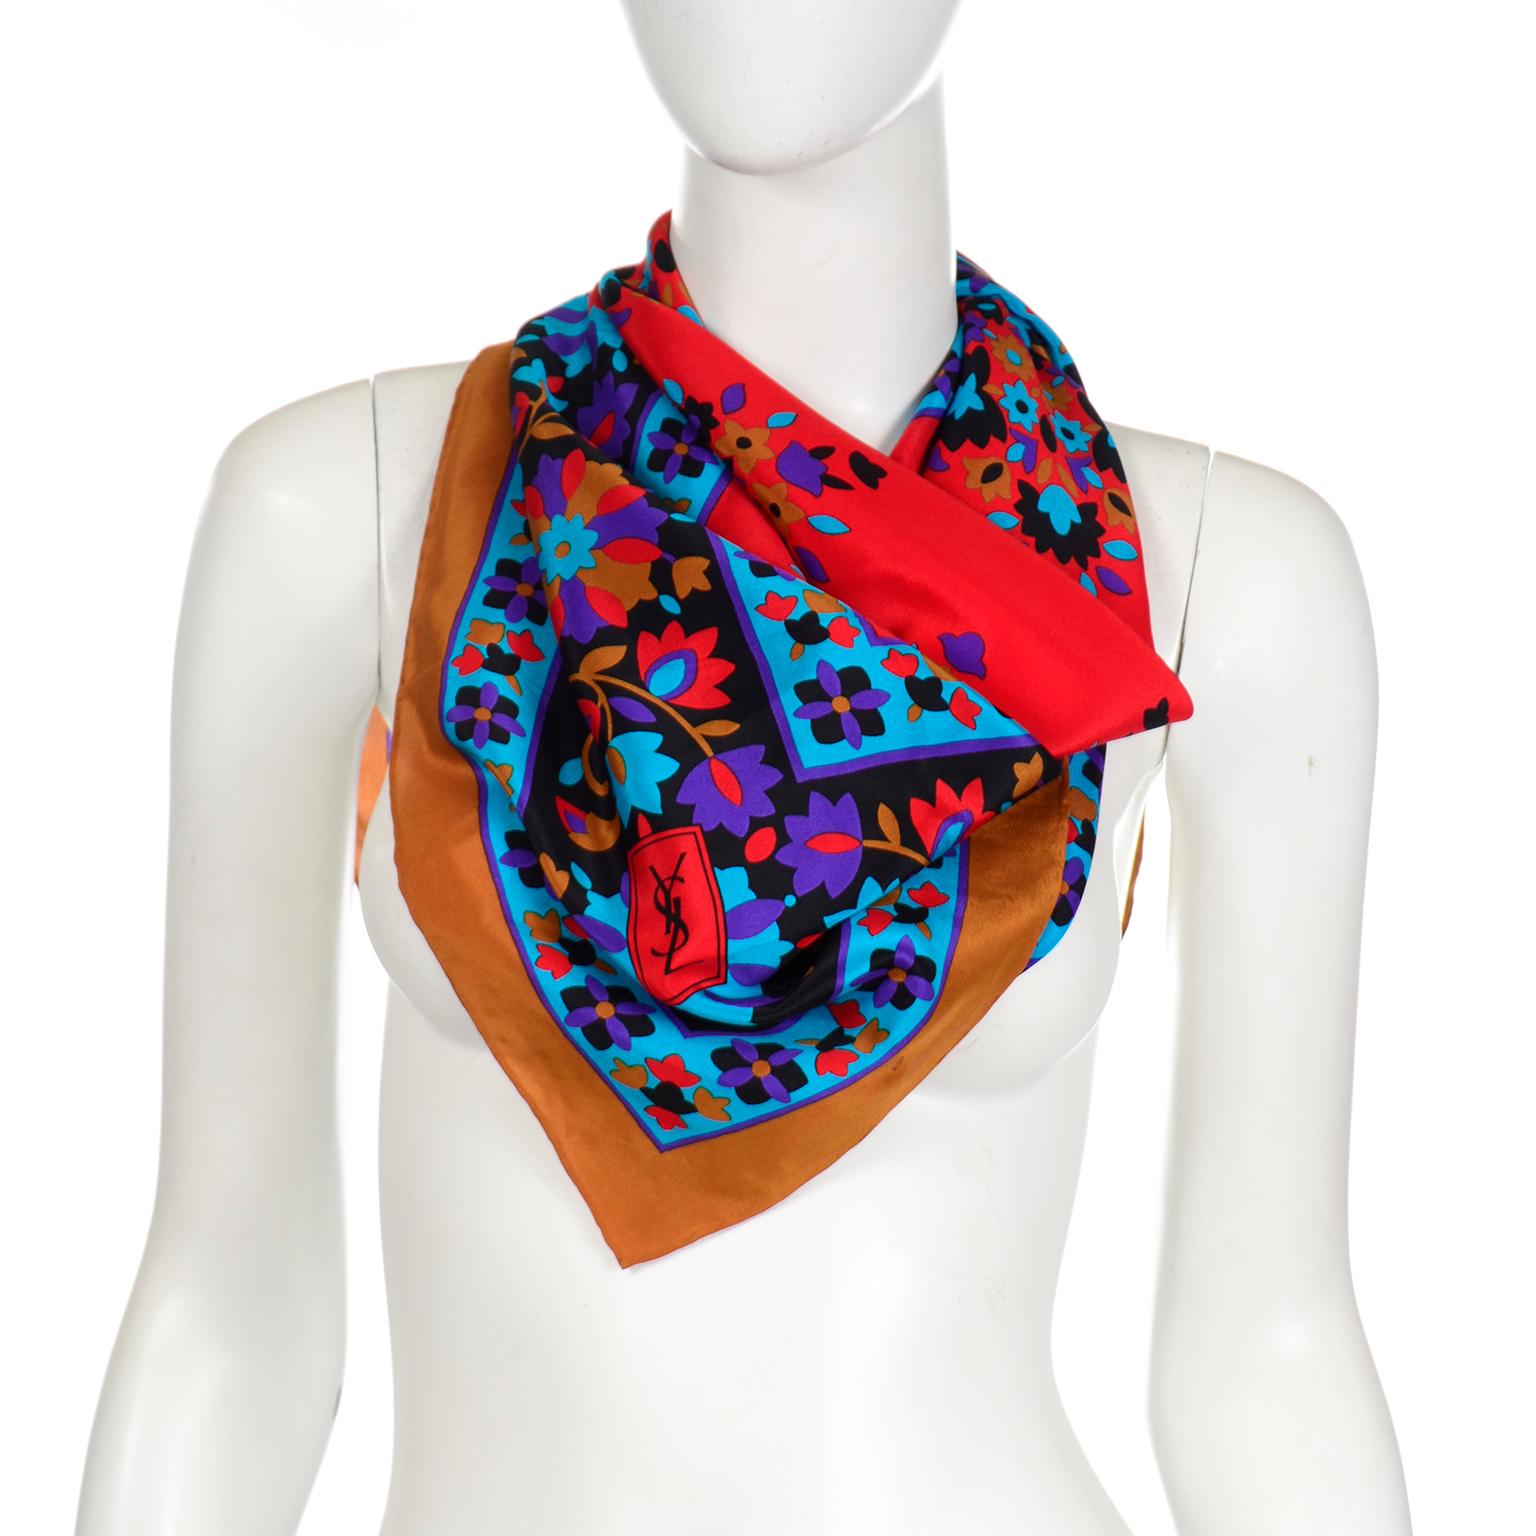 This beautiful, colorful Yves Saint Laurent vintage scarf is in rich shades of blue, red, black and purple with a copper brown border. The print depicts a folk floral design and the scarf measures 36